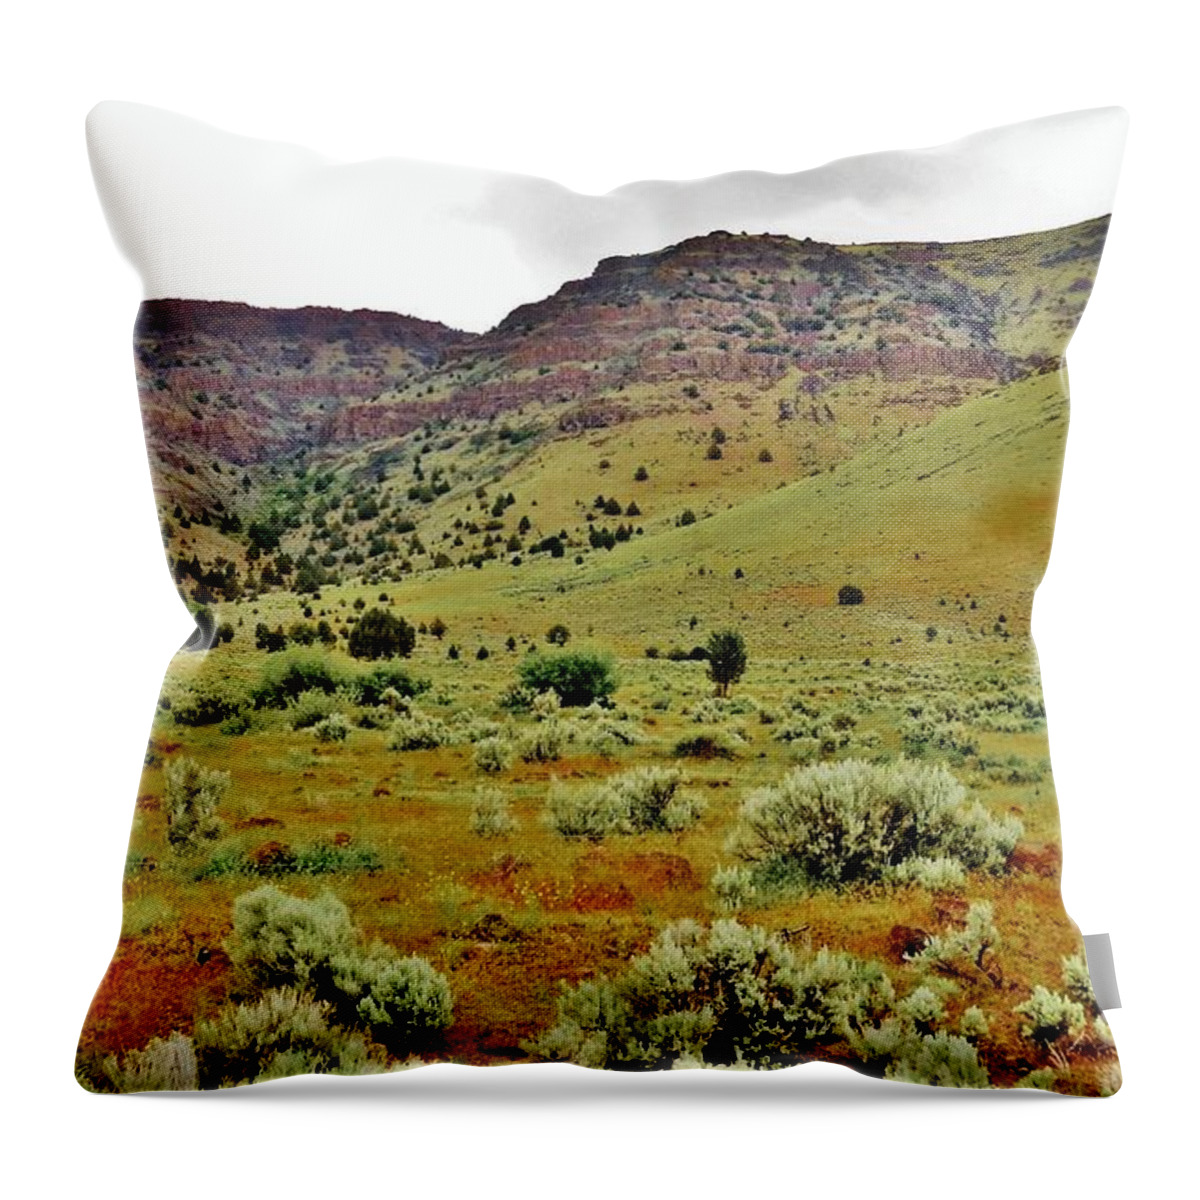 Eastern Oregon Throw Pillow featuring the photograph Rim Rock and Sage Brush by Michele Penner